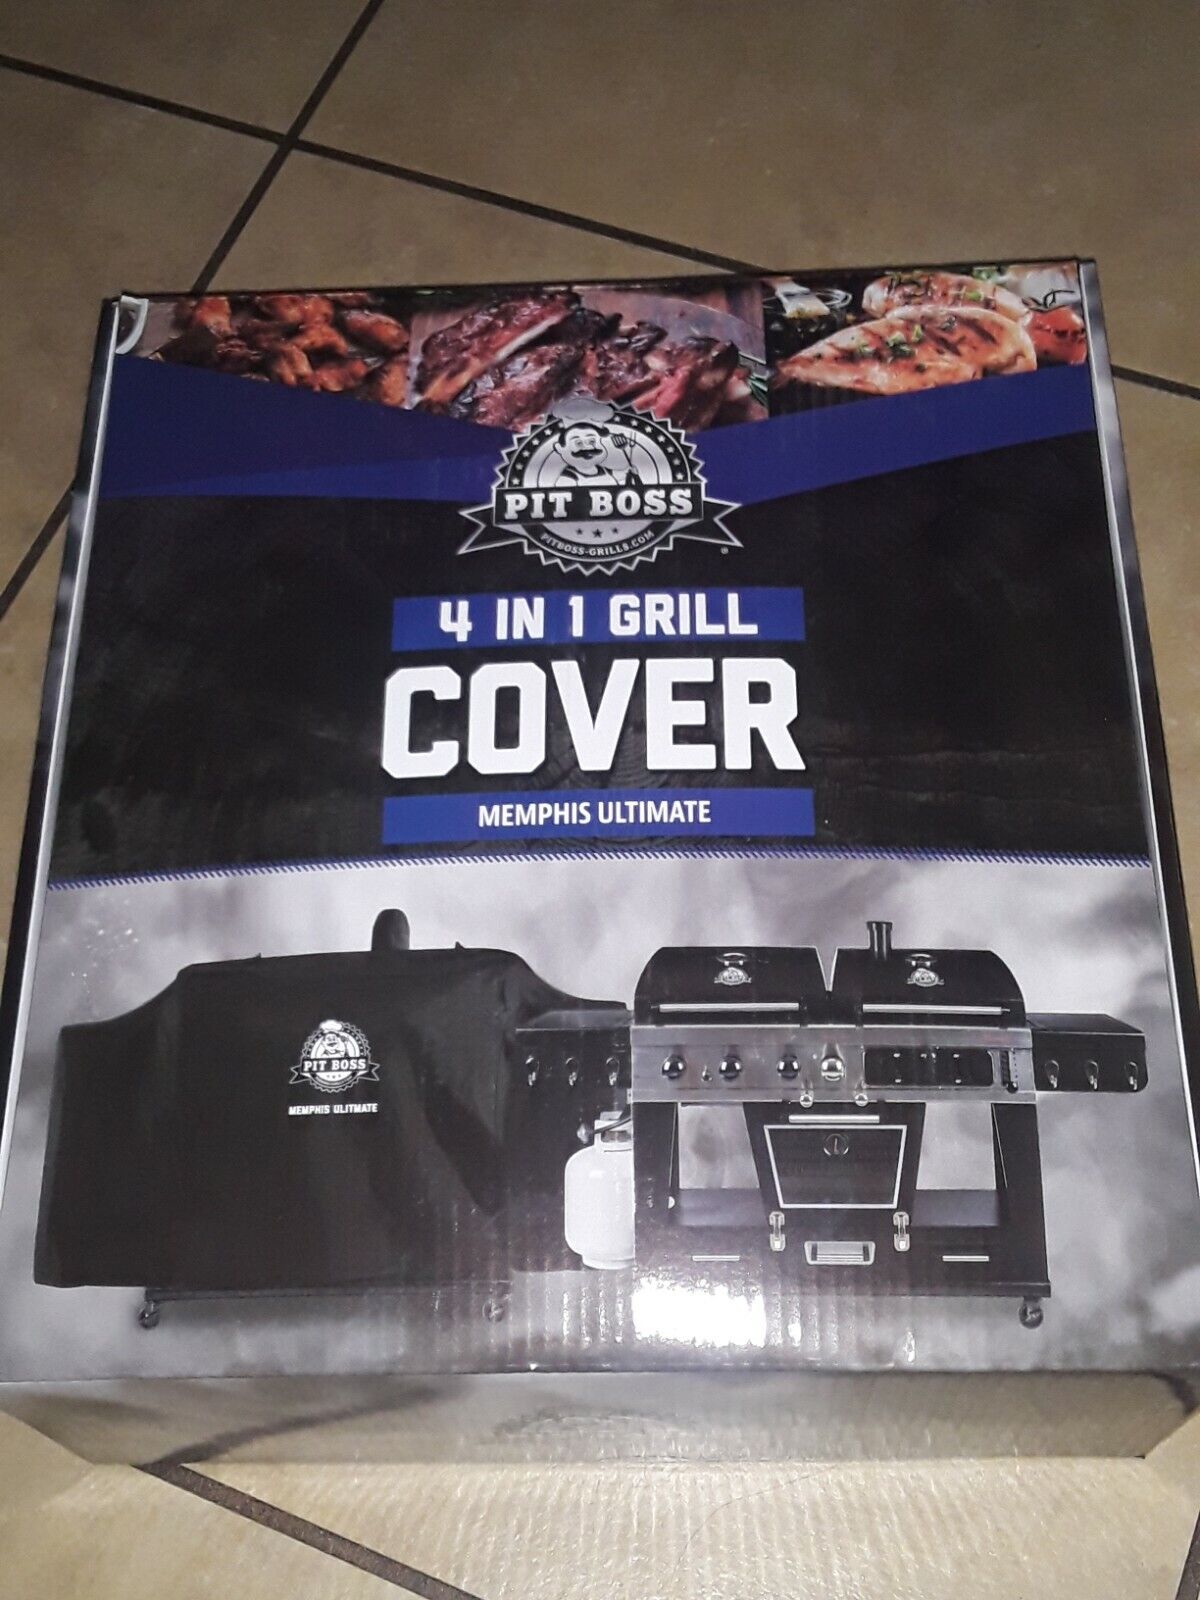 pit boss memphis ultimate 4 in 1 grill cover